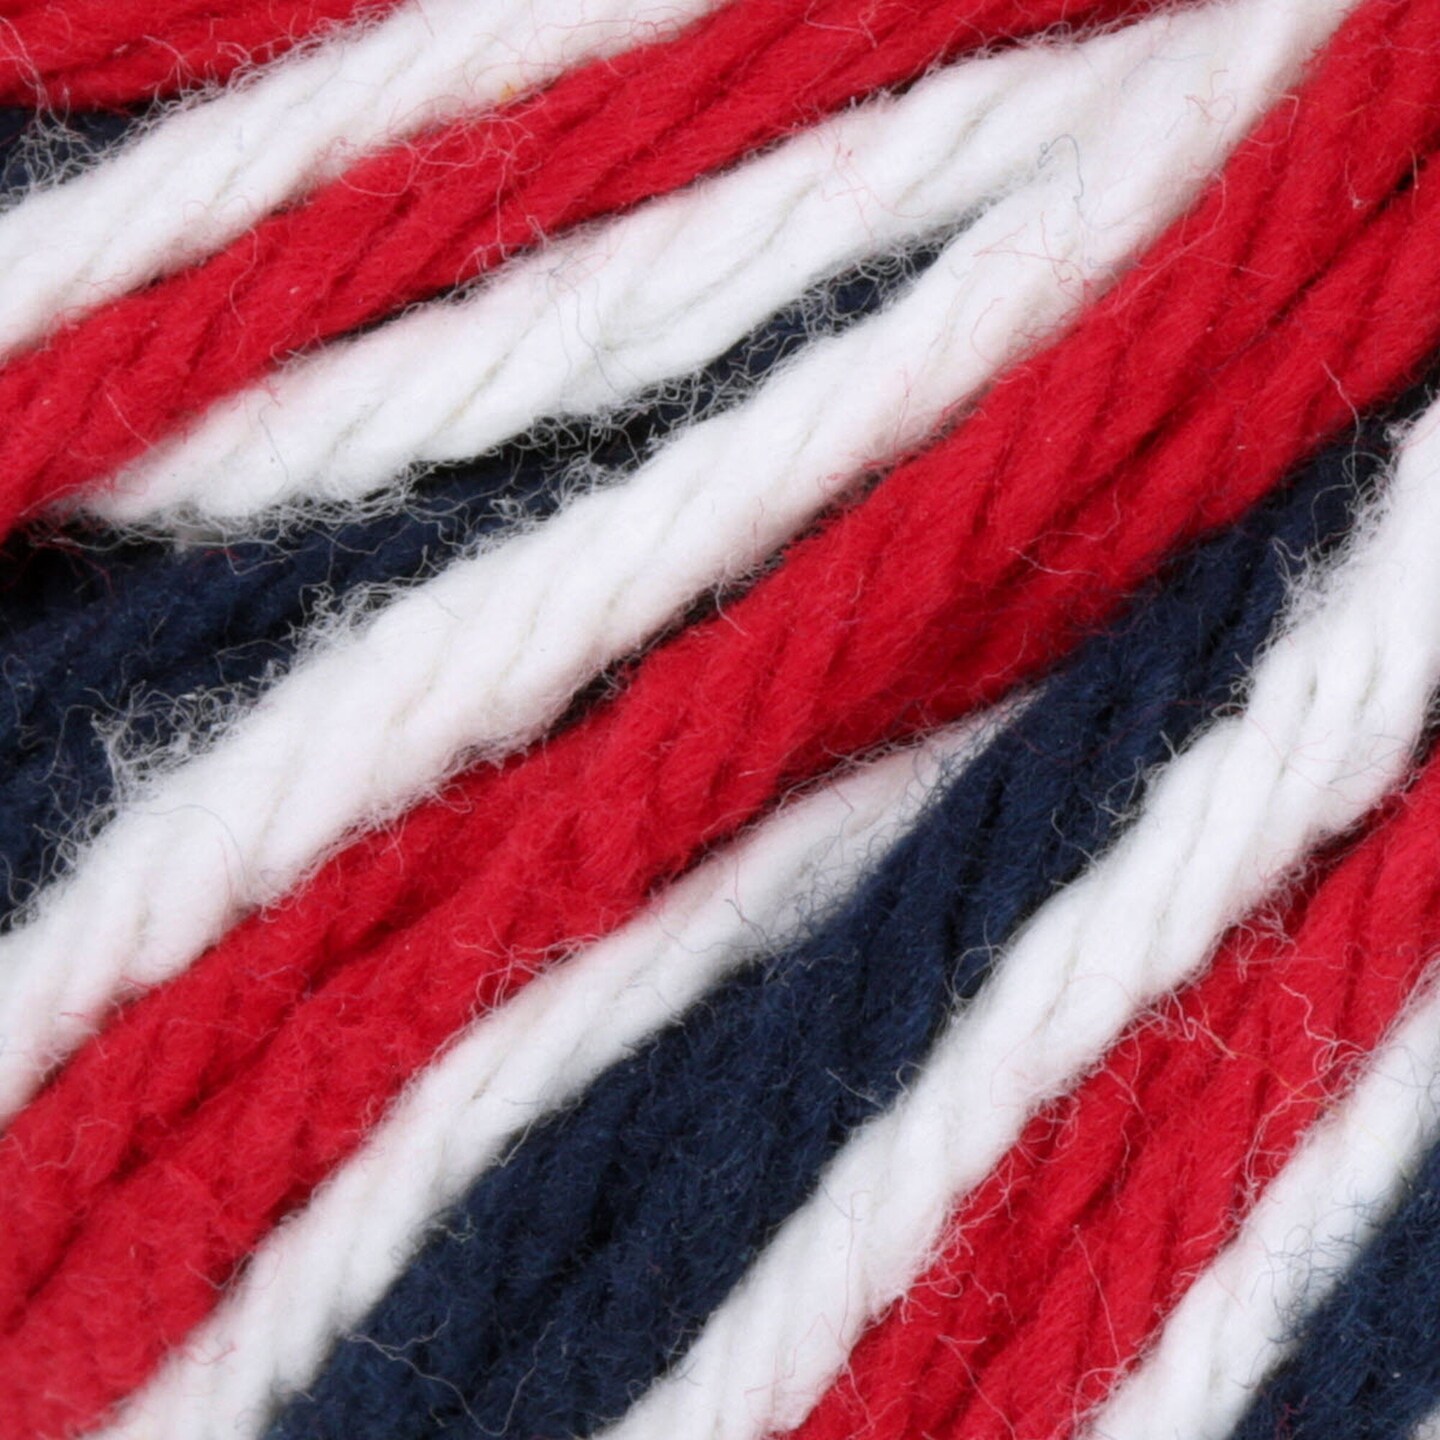 Lily Sugar'n Cream Yarn - Ombres-Red, White & Blue